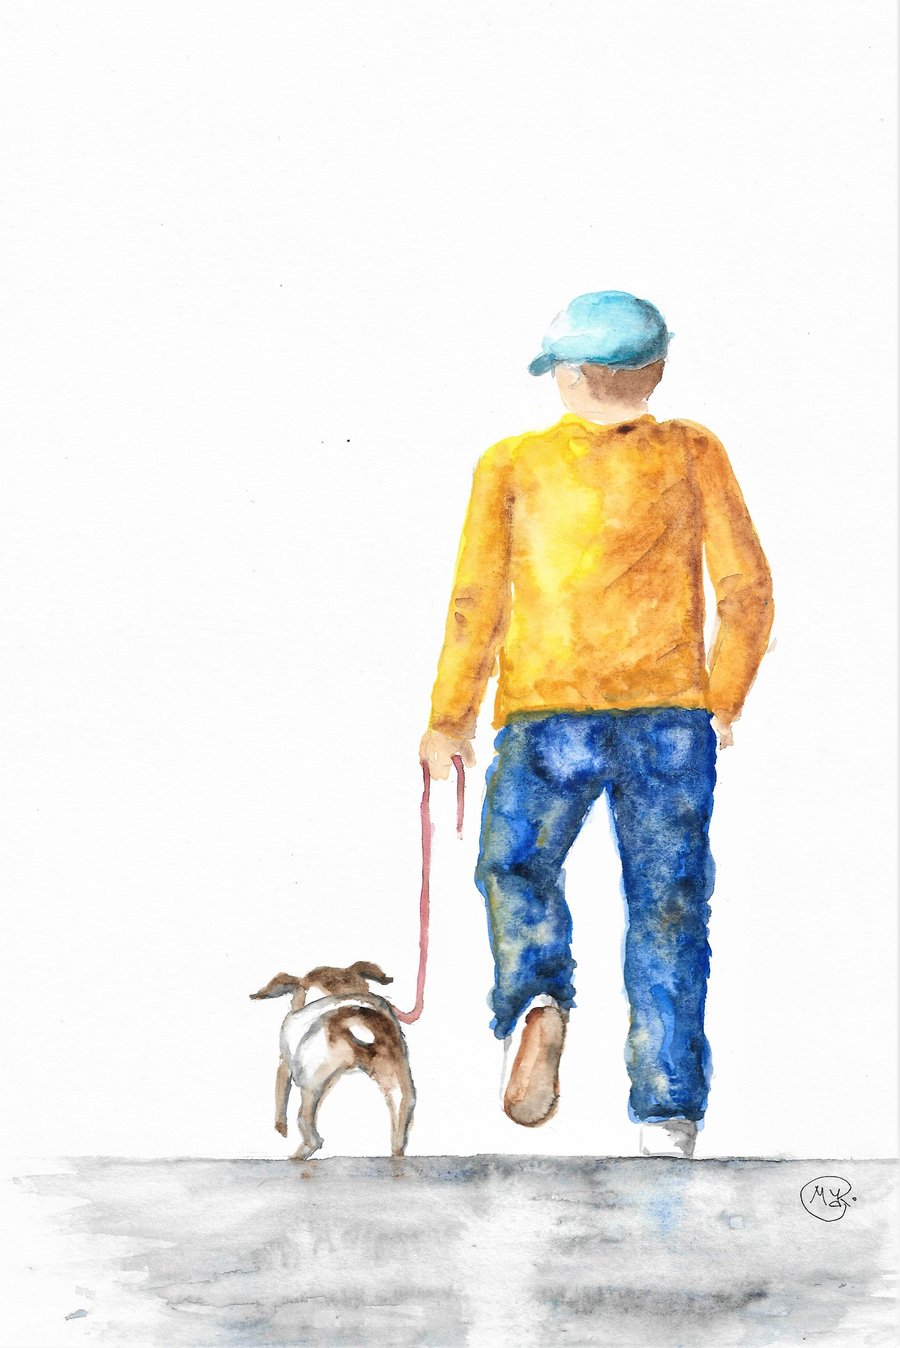 Taking the Dog for walkies, original painting